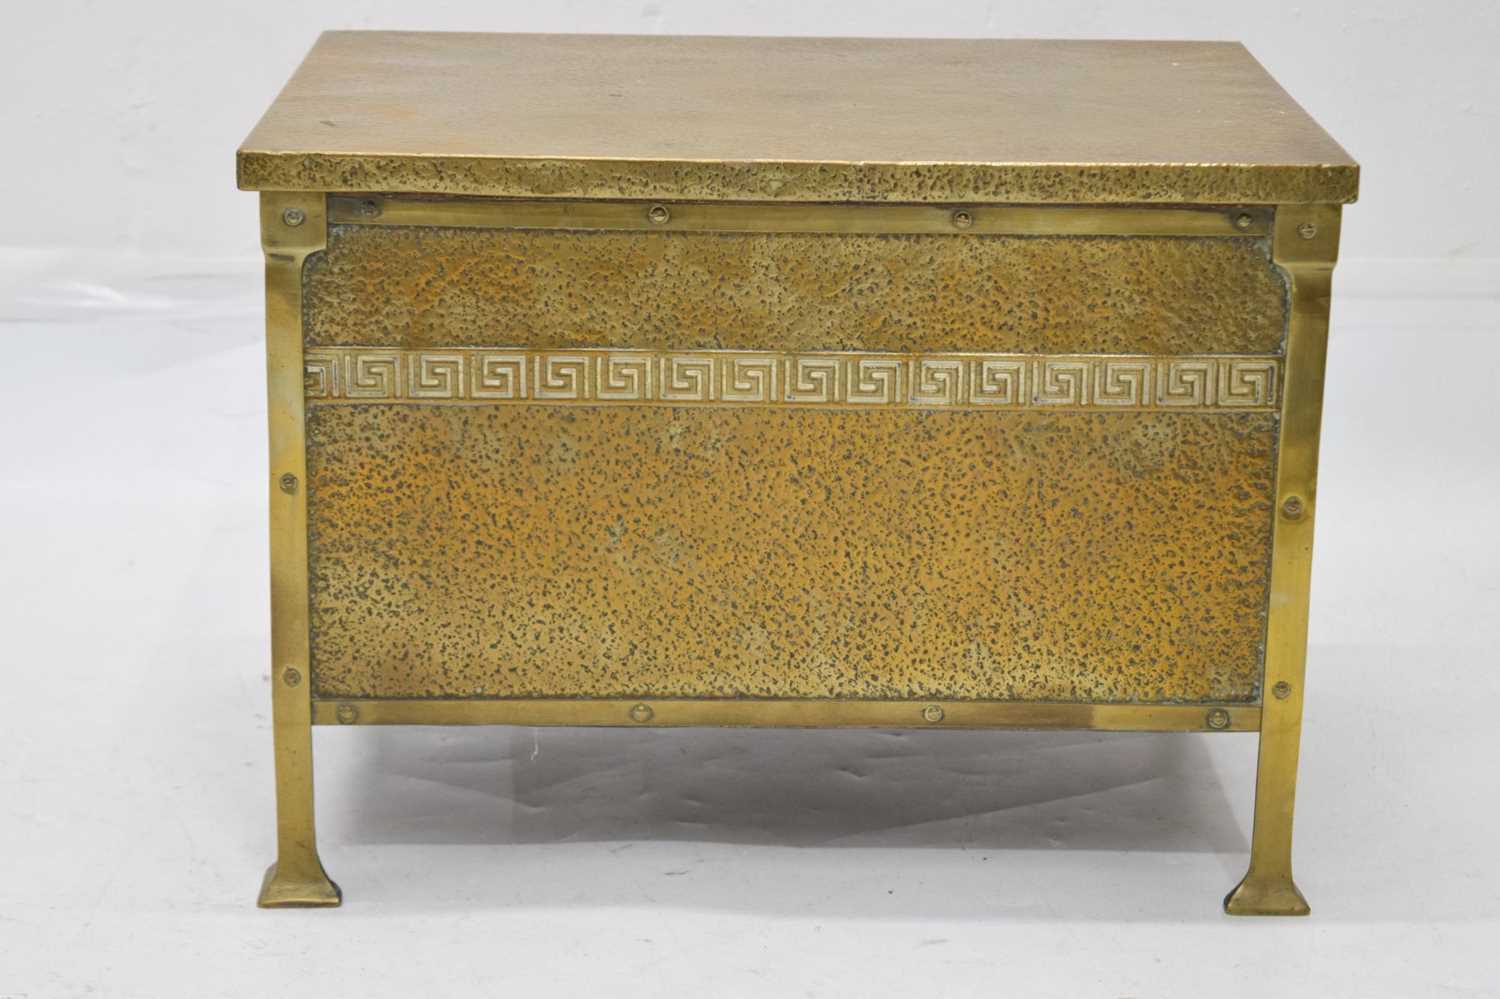 Early 20th century hammered brass coal/log bin - Image 2 of 7